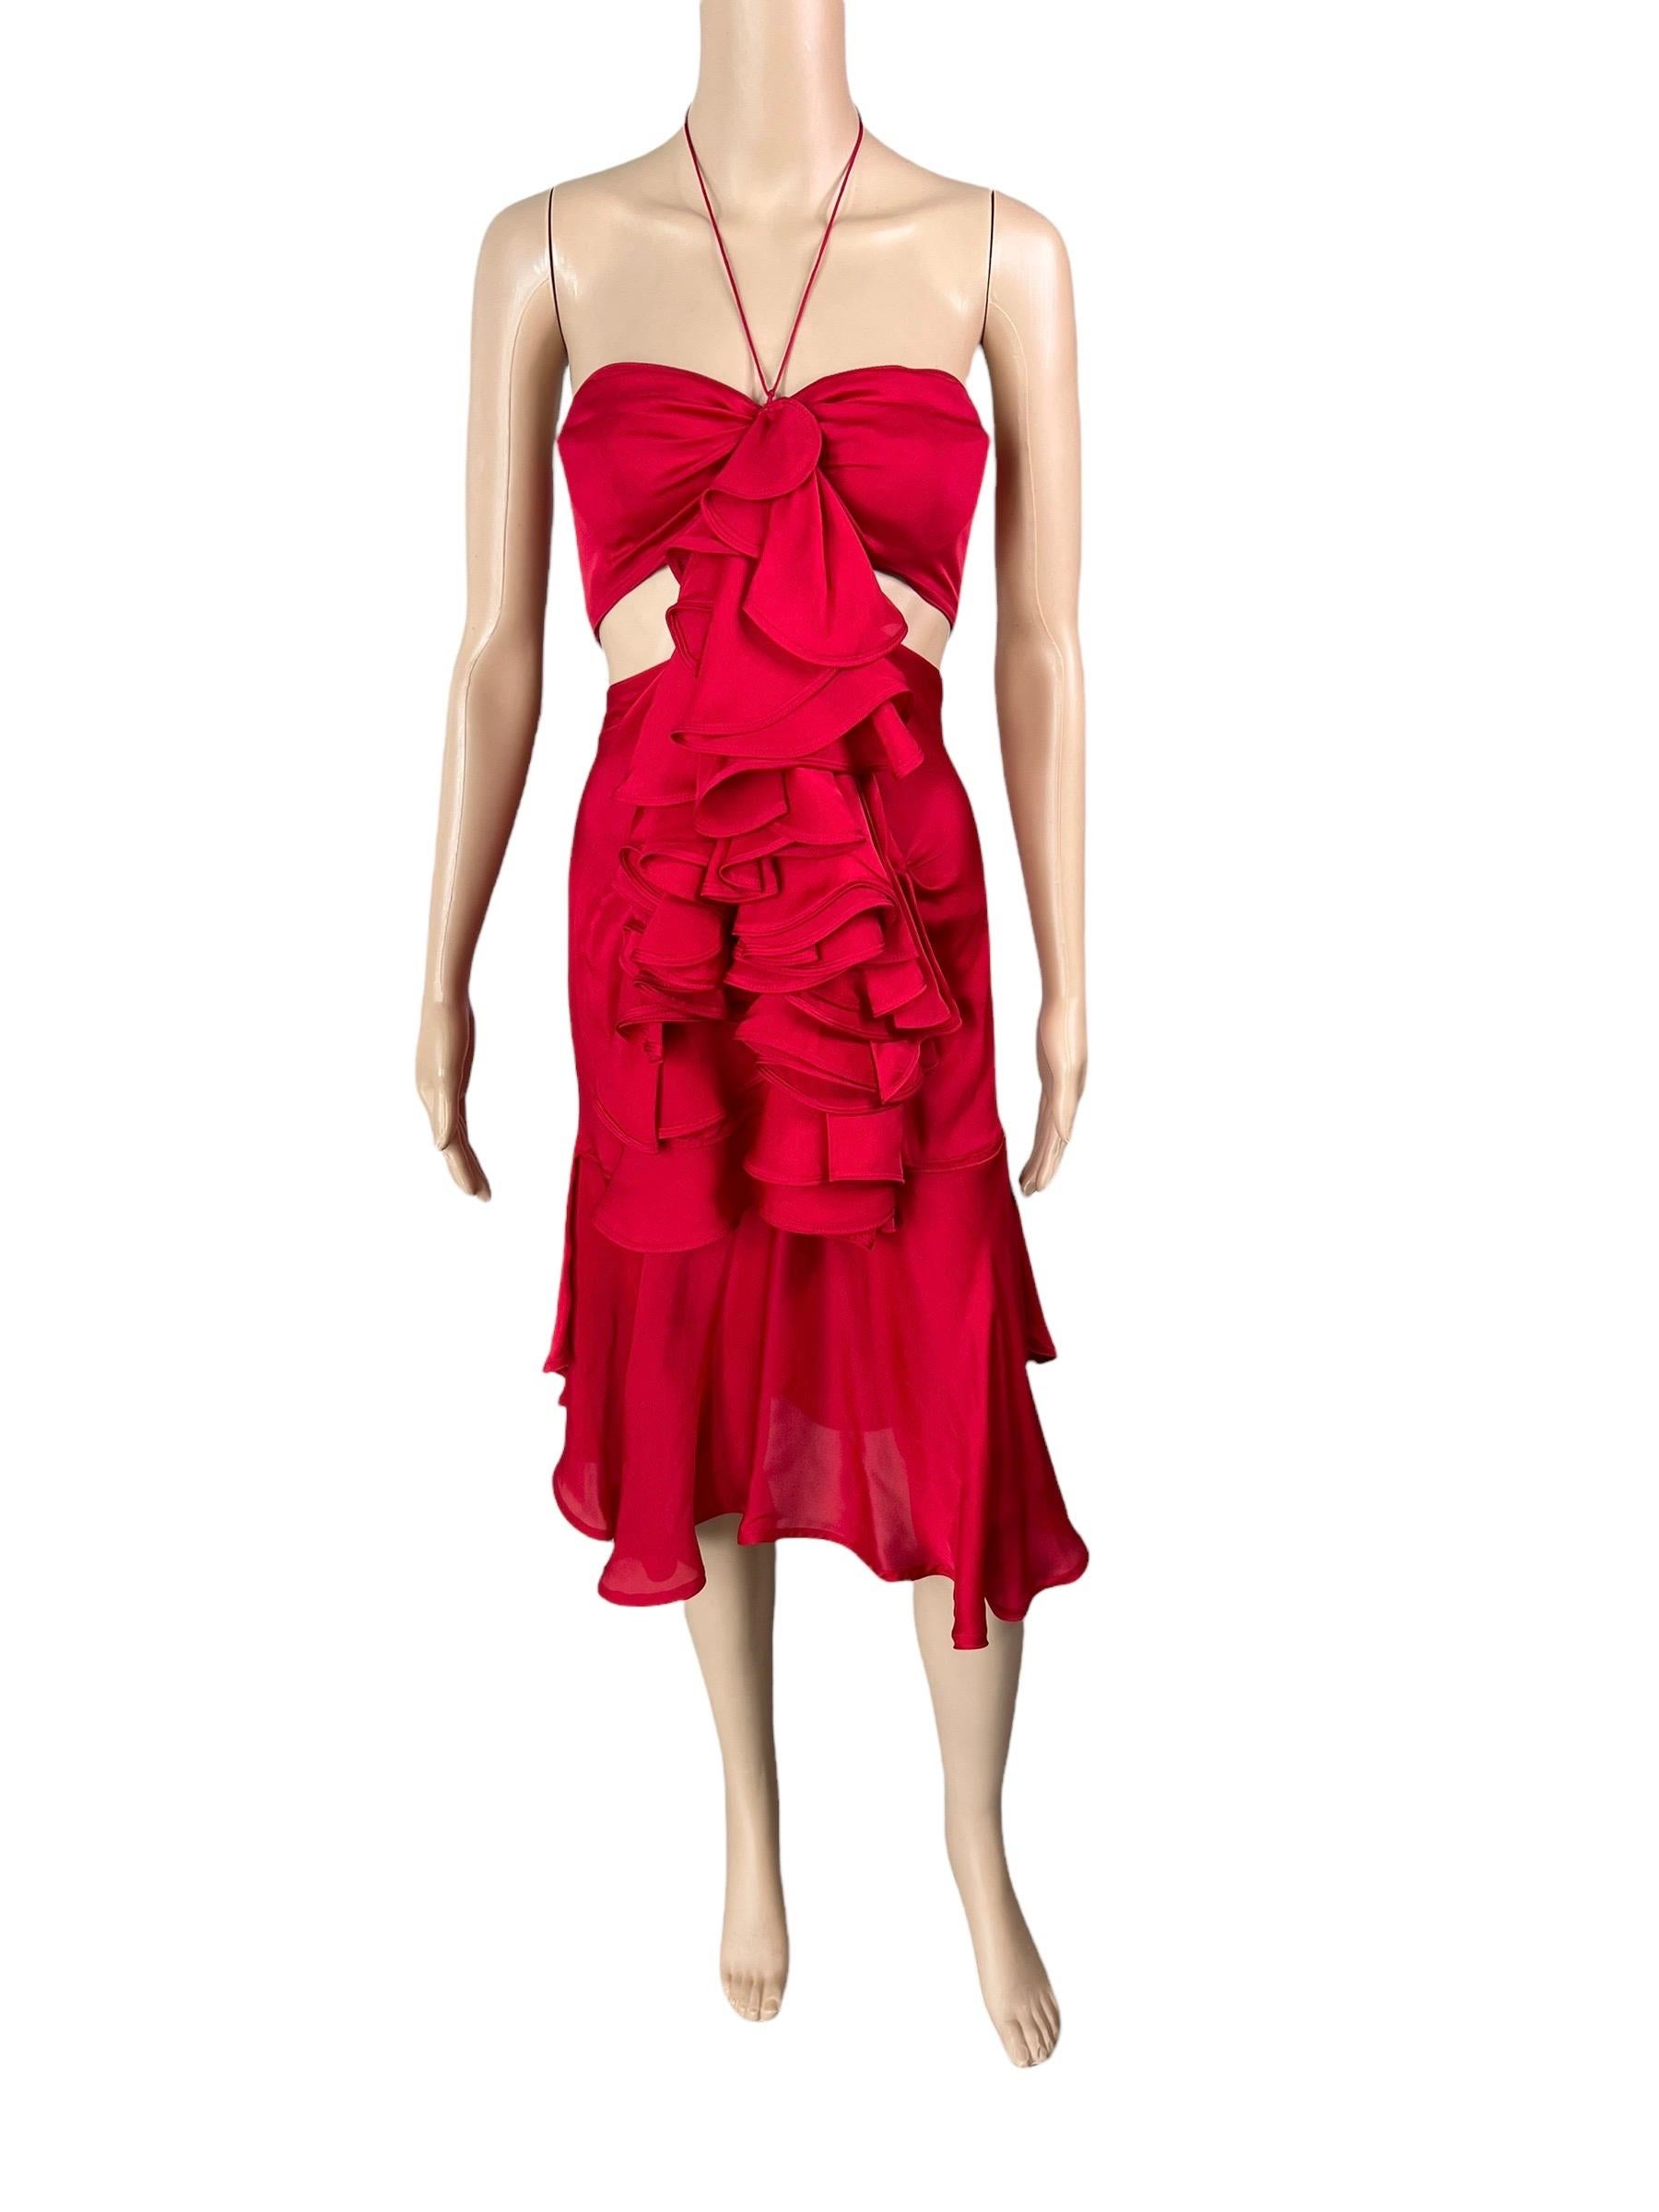 Tom Ford for Yves Saint Laurent  F/W 2003 Runway Ruffled Cutout Bra Red Dress  For Sale 3